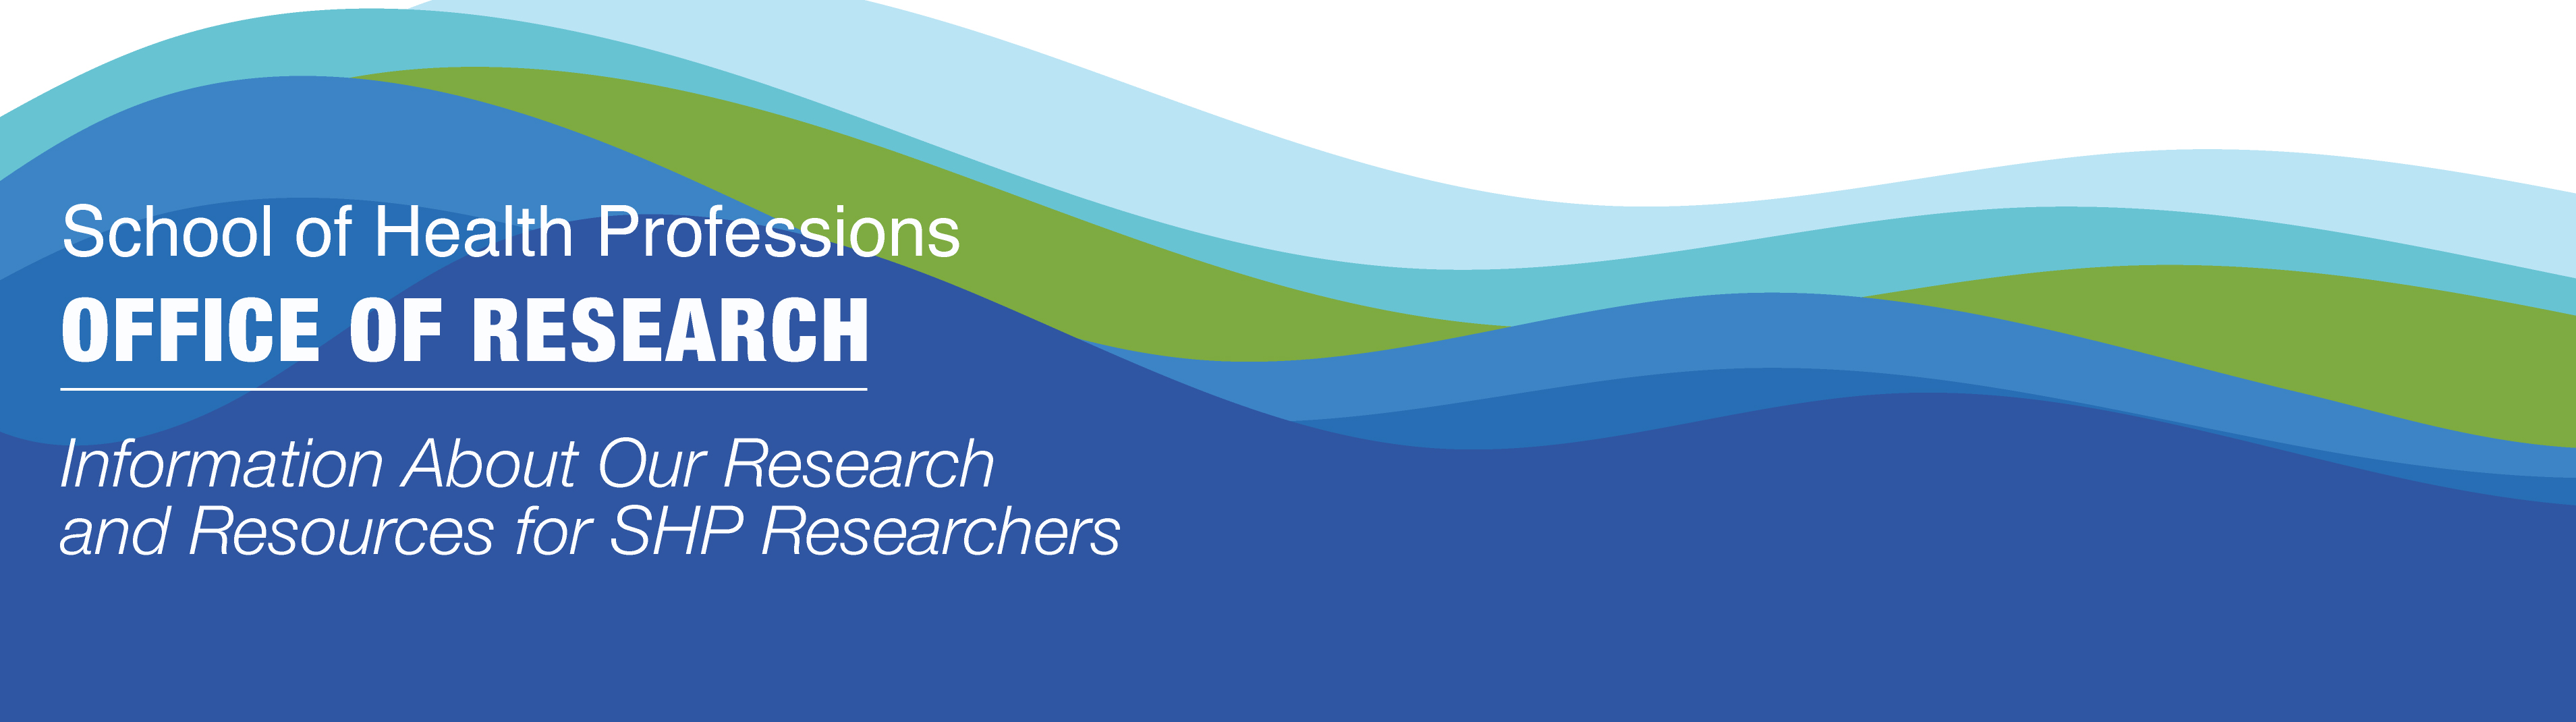 wave graphic banner with text, "School of Health Professions Office of Research Information About Our Research and Resources for SHP Researchers